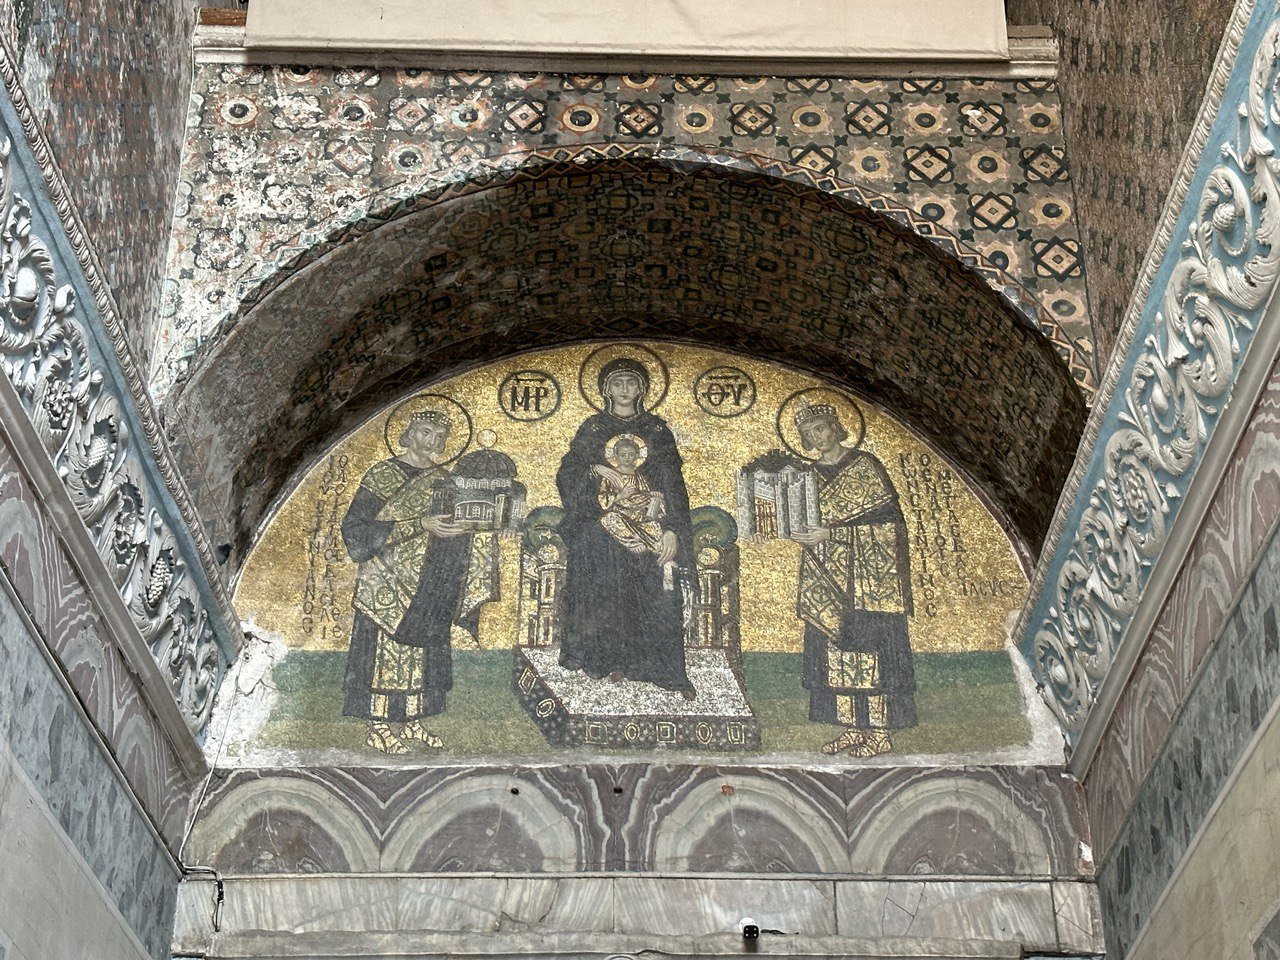 Certain mosques were originally Christian churches. This mosaic in the Hagia Sophia shows Mary with Jesus receiving gifts from Emperors Constantine and Justin.